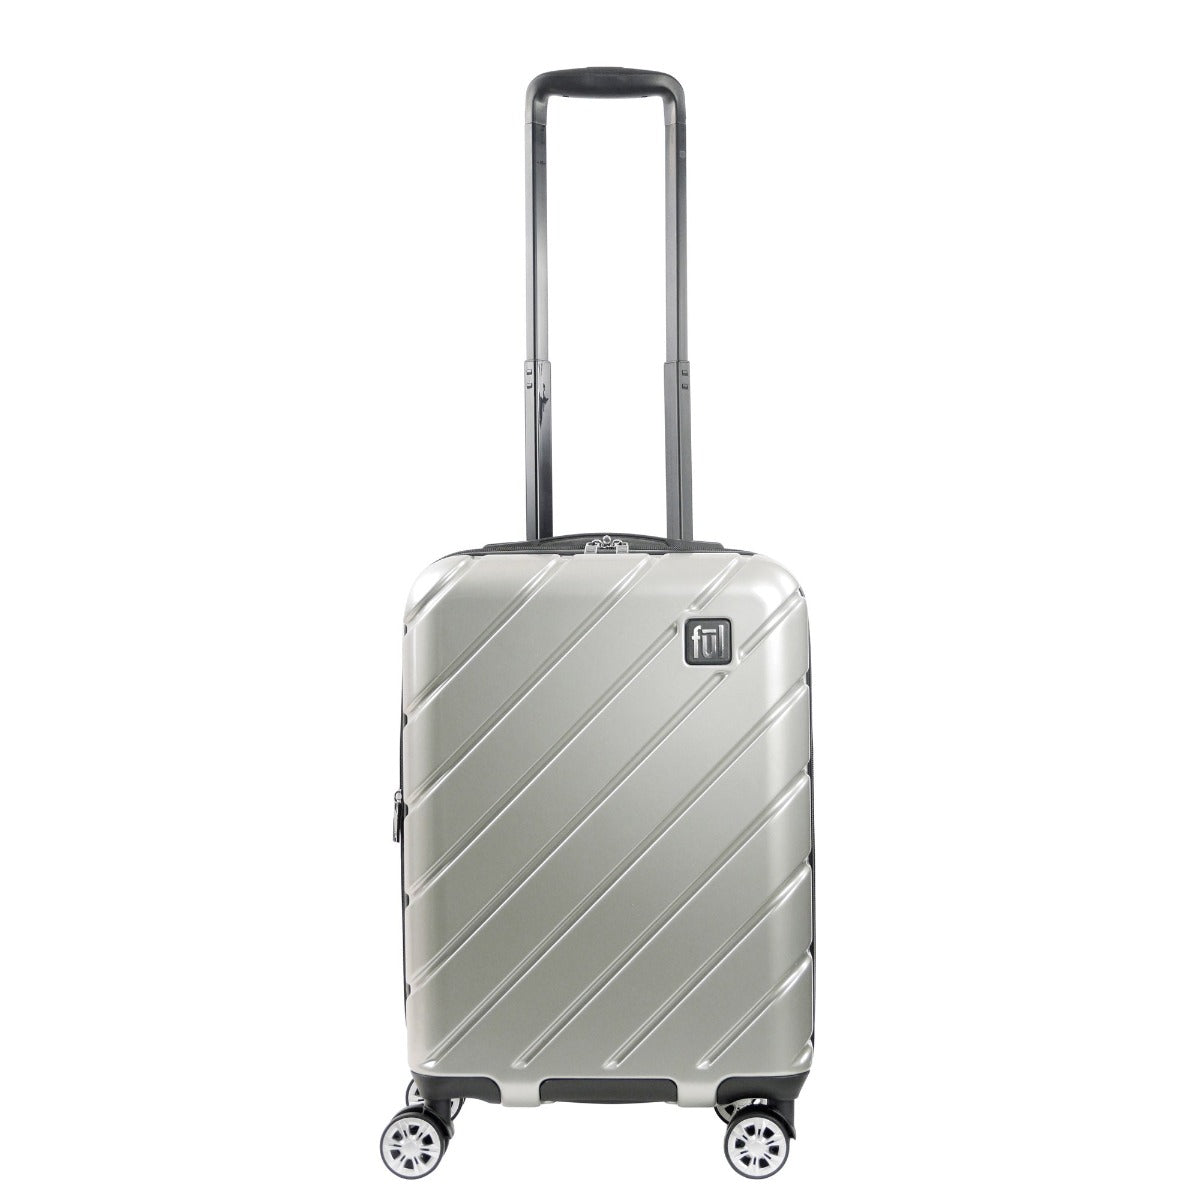 Ful Velocity 22-inch carry-on hardside spinner suitcase silver luggage